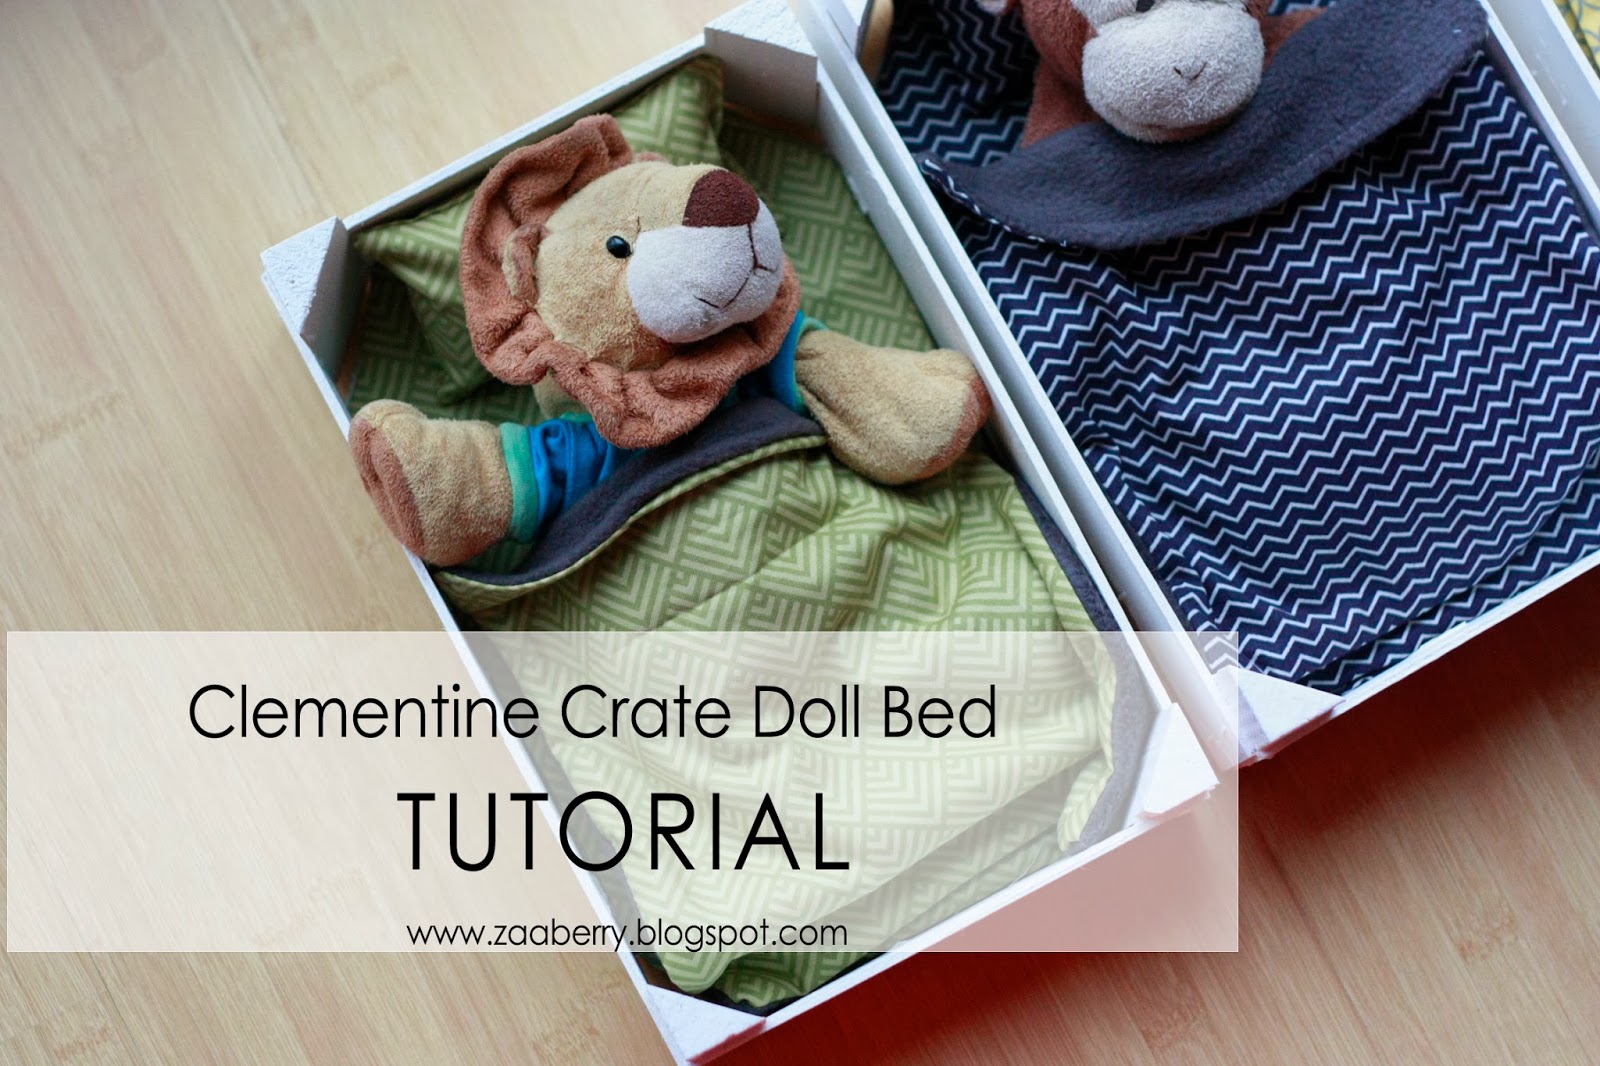 Doll Bed Tutorial- using clementine crates! | plushie patterns